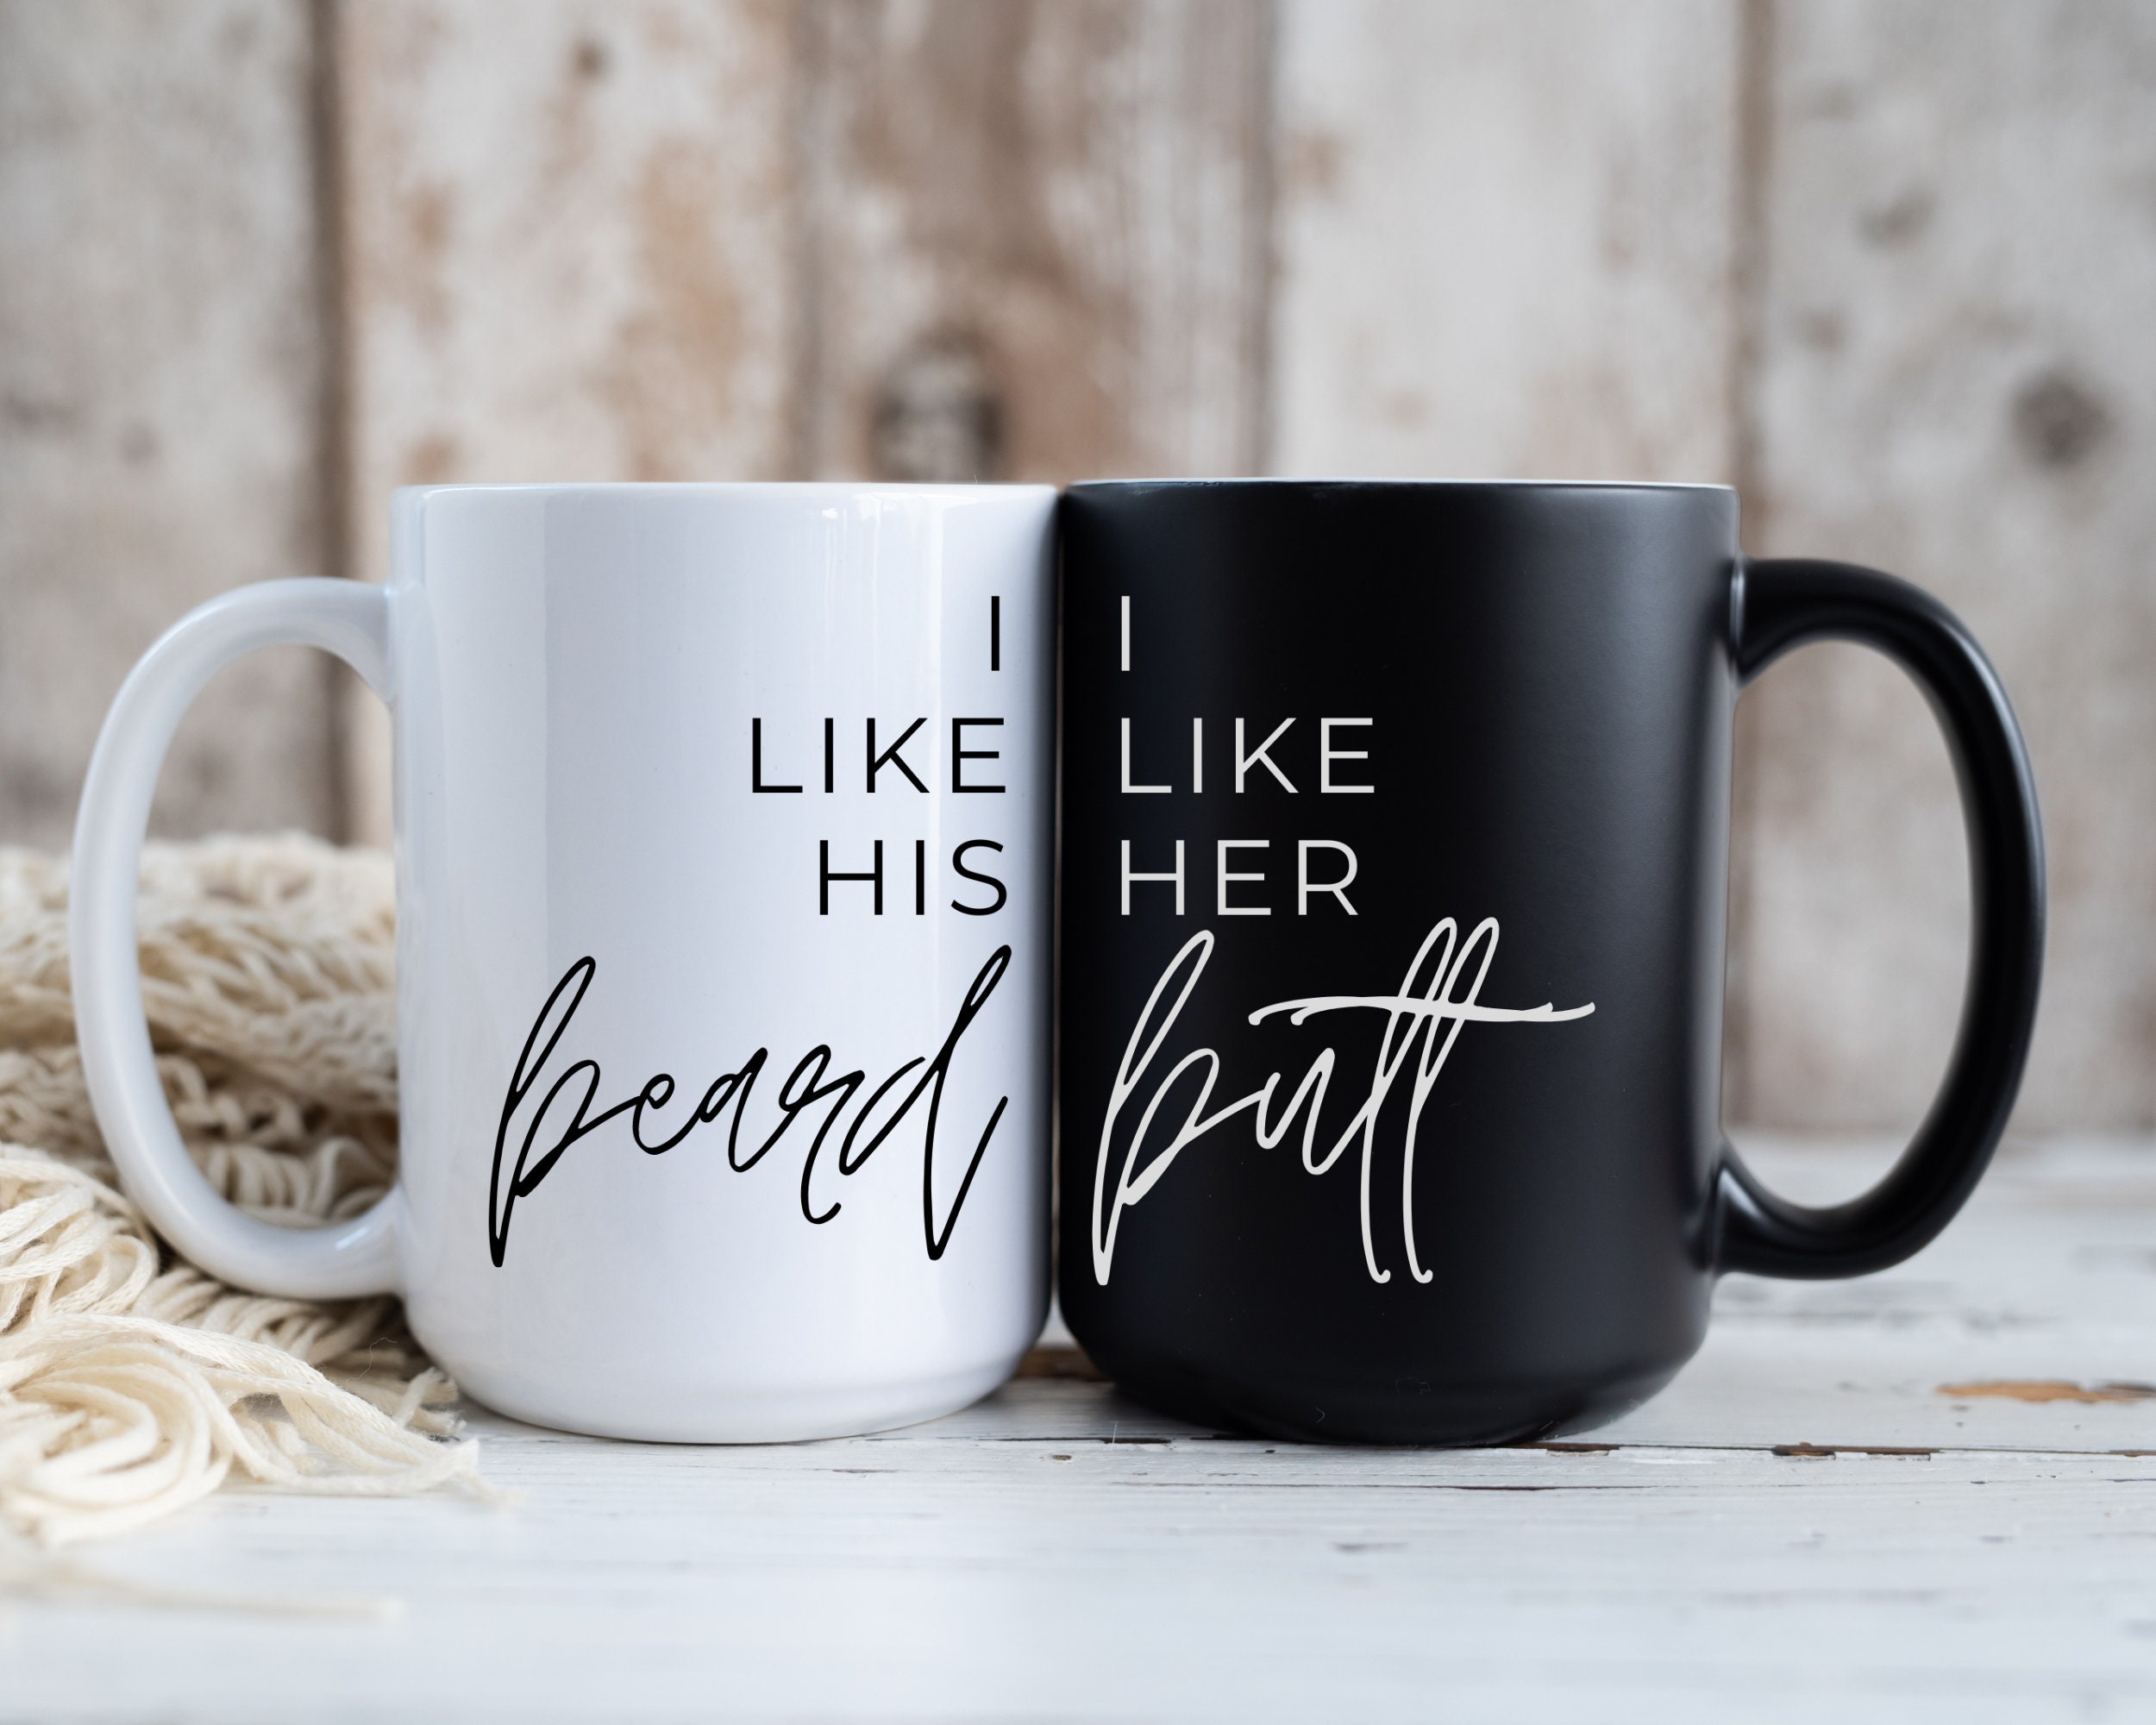 His and Her Coffee Mugs, His and Her Coffee Cups, His and Hers Coffee Mugs,  His and Hers Coffee Cups, His Coffee Cup Mug, Her Coffee Cup Mug 